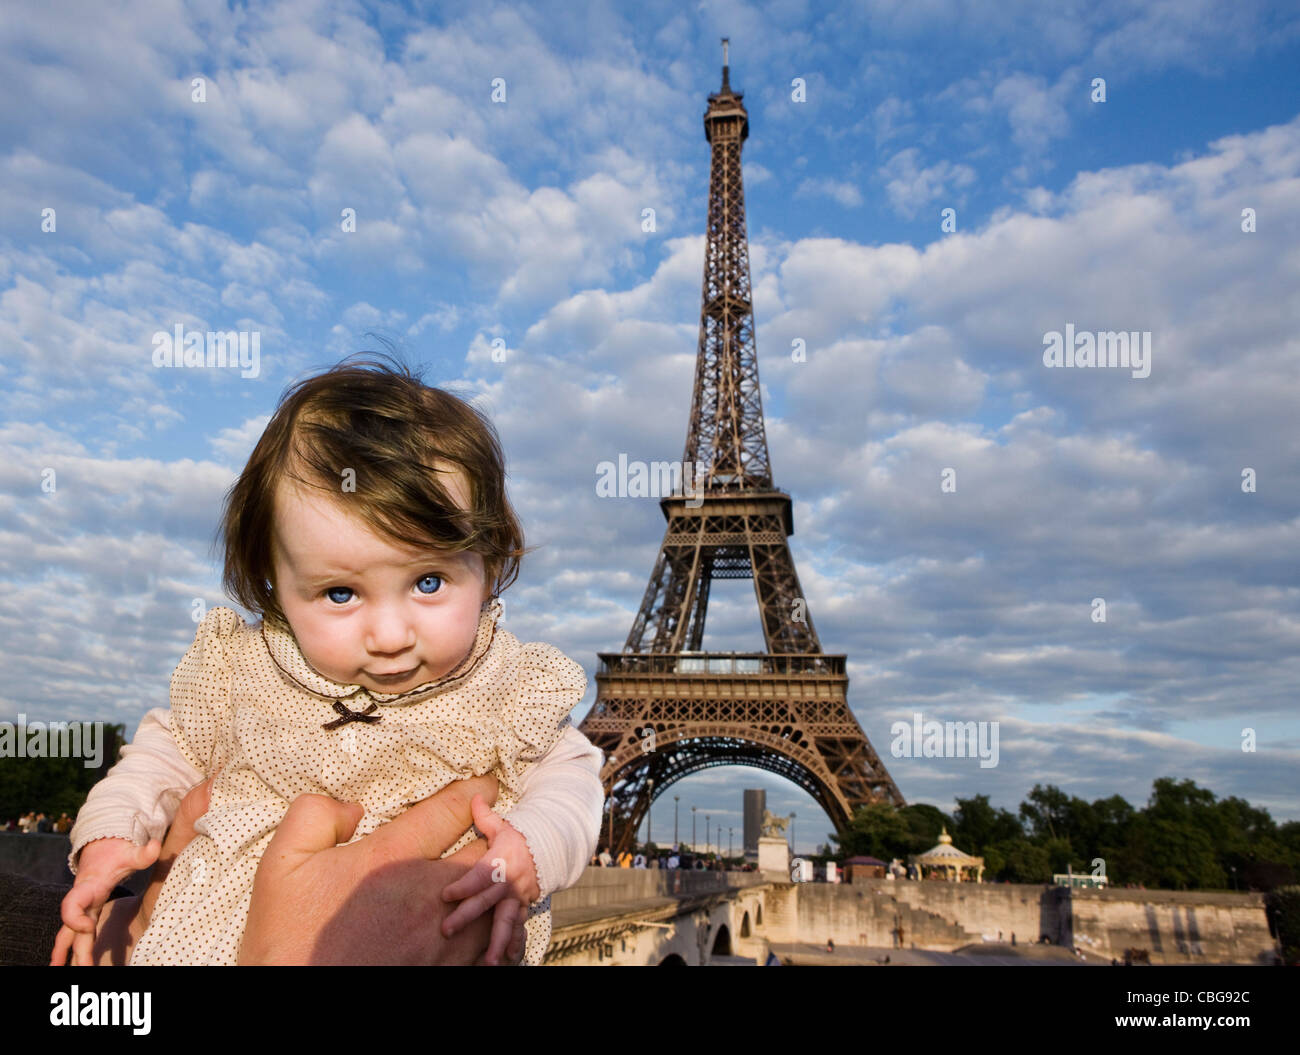 A baby being held aloft in front of the Eiffel Tower, Paris, France Stock Photo